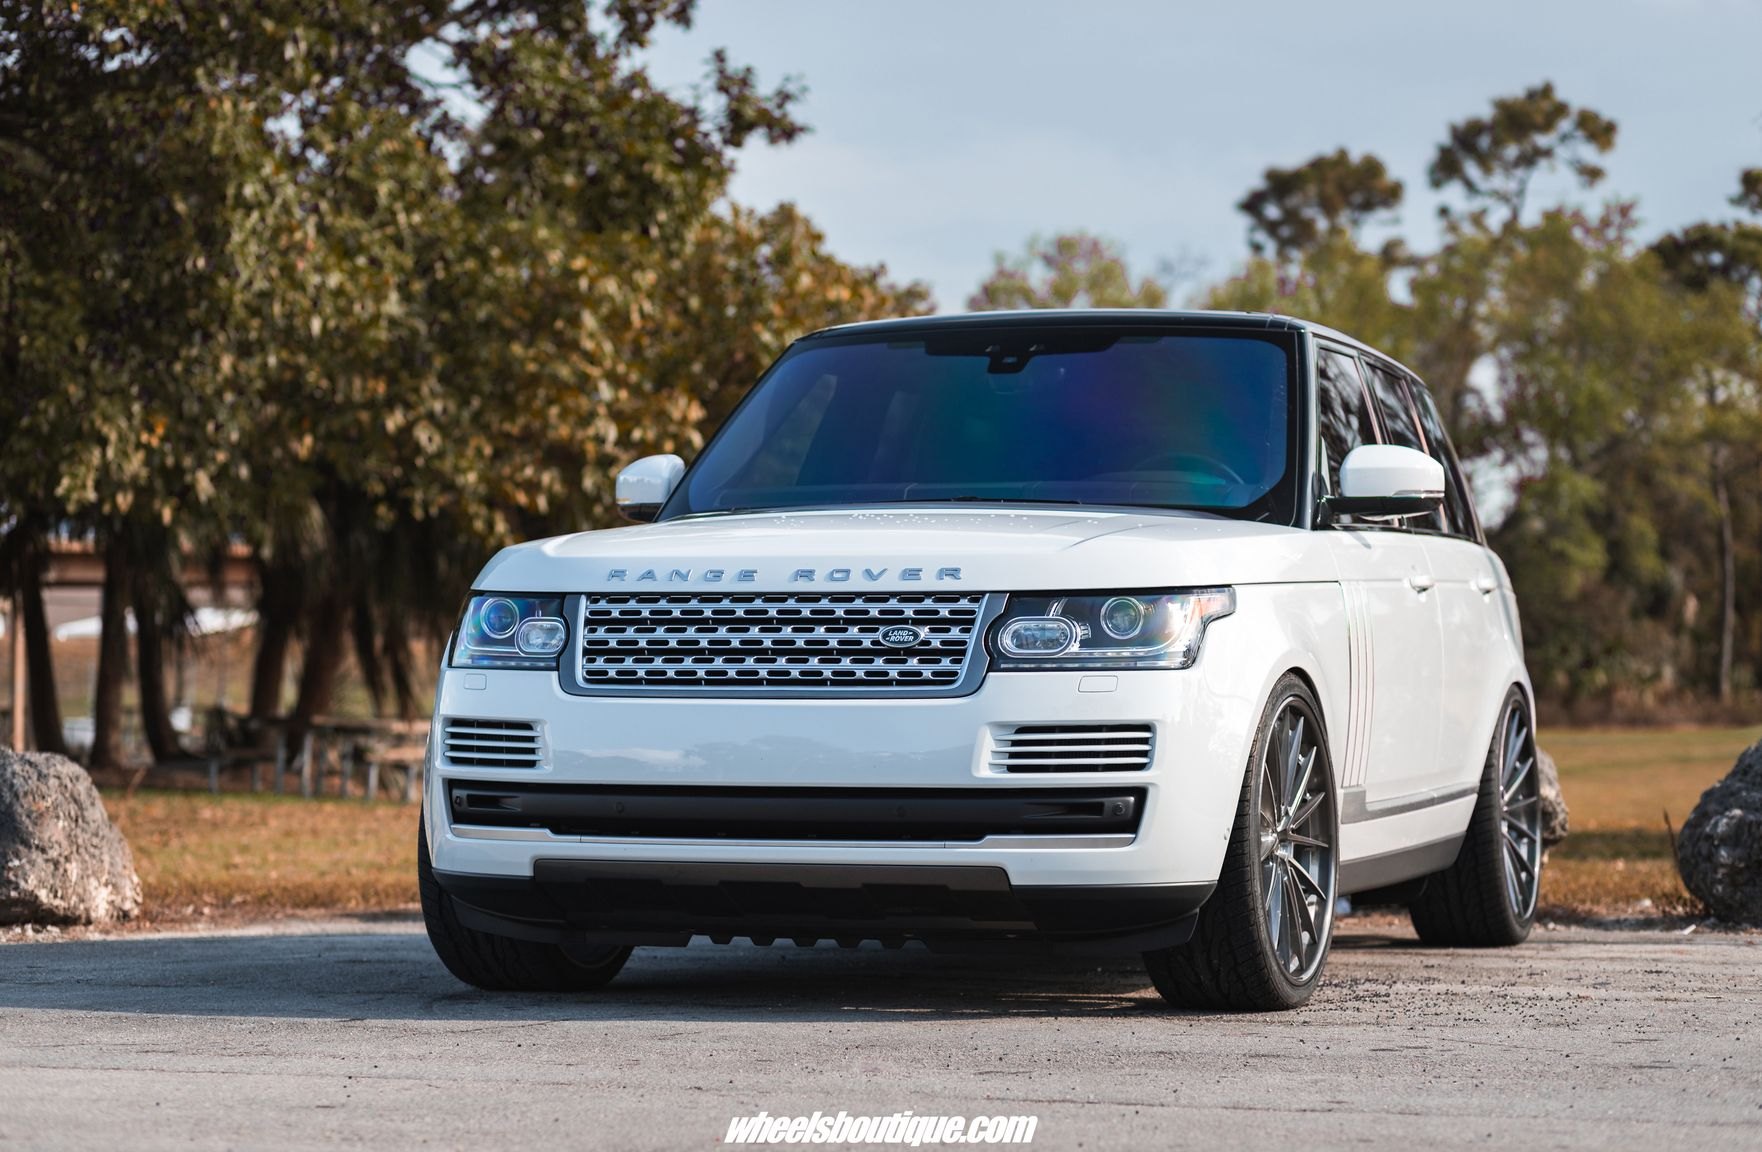 Chrome Mesh Grille on White Range Rover - Photo by Anrky Wheels